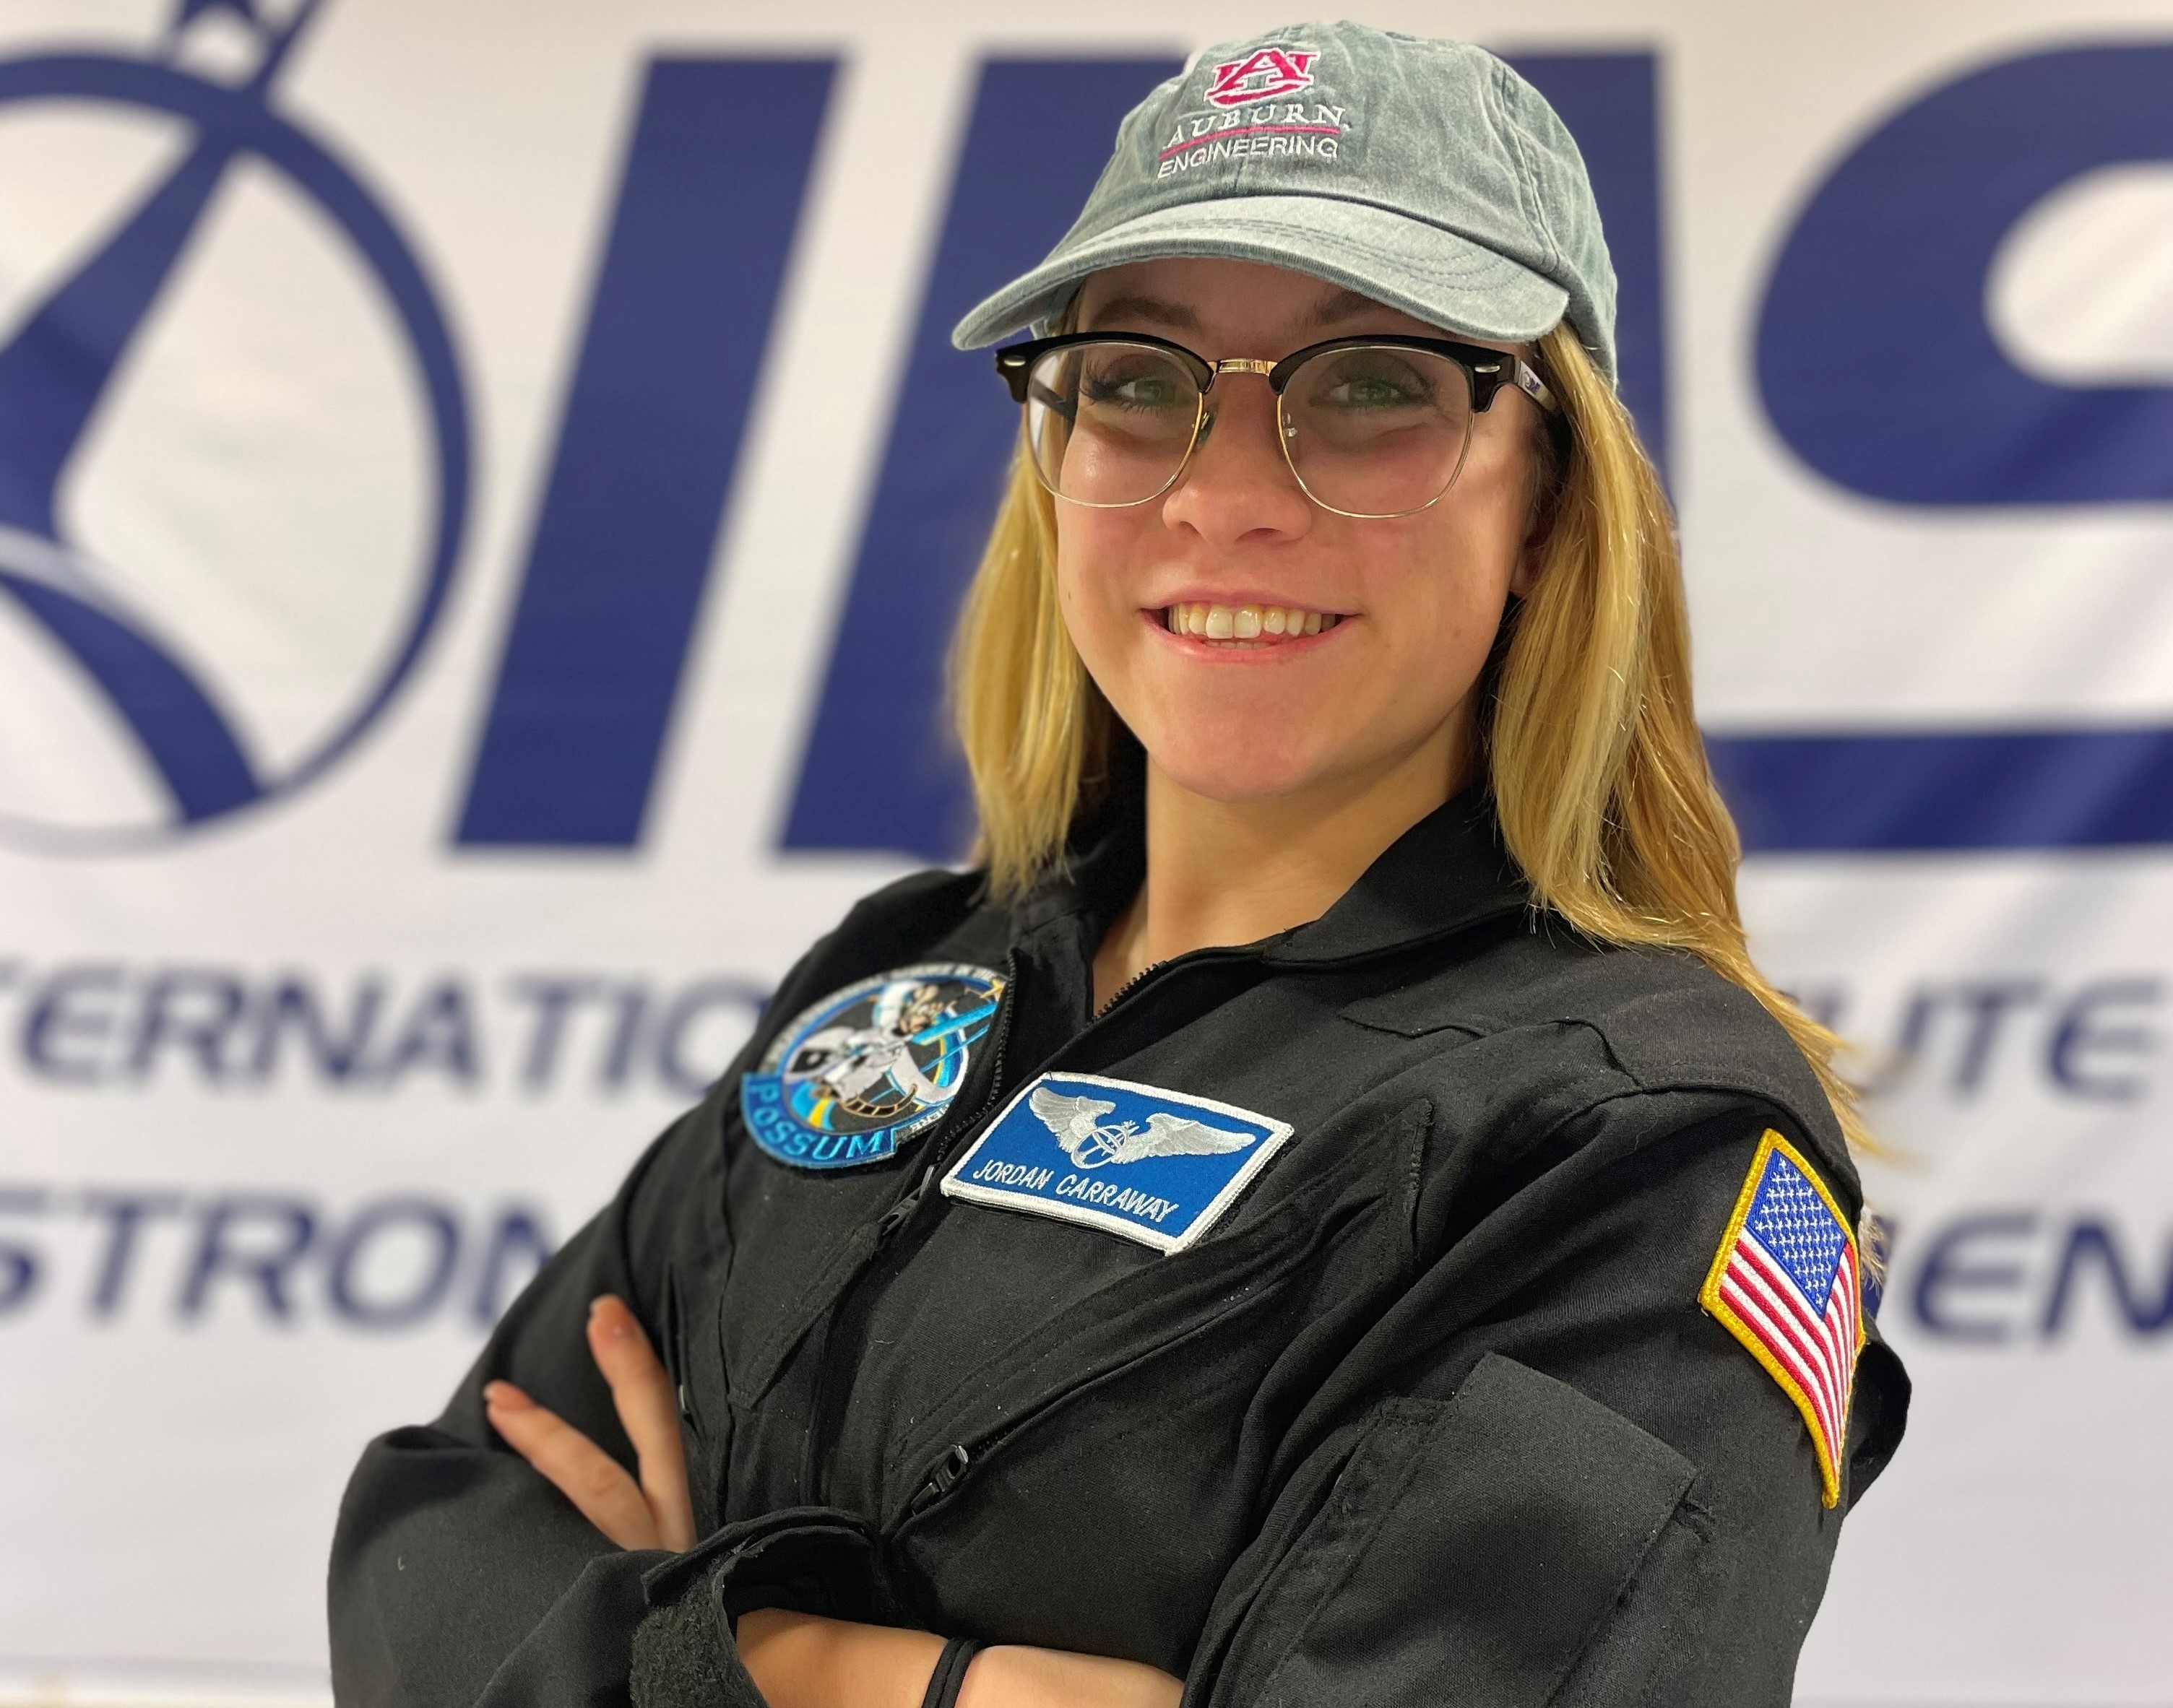 Jordan Carraway, who is studying industrial and systems engineering, recently took a step closer to her dream of becoming an astronaut when she was accepted into Project PoSSUM (Polar Suborbital Science in the Upper Mesosphere), a program hosted by the International Institute of Astronautical Sciences. 